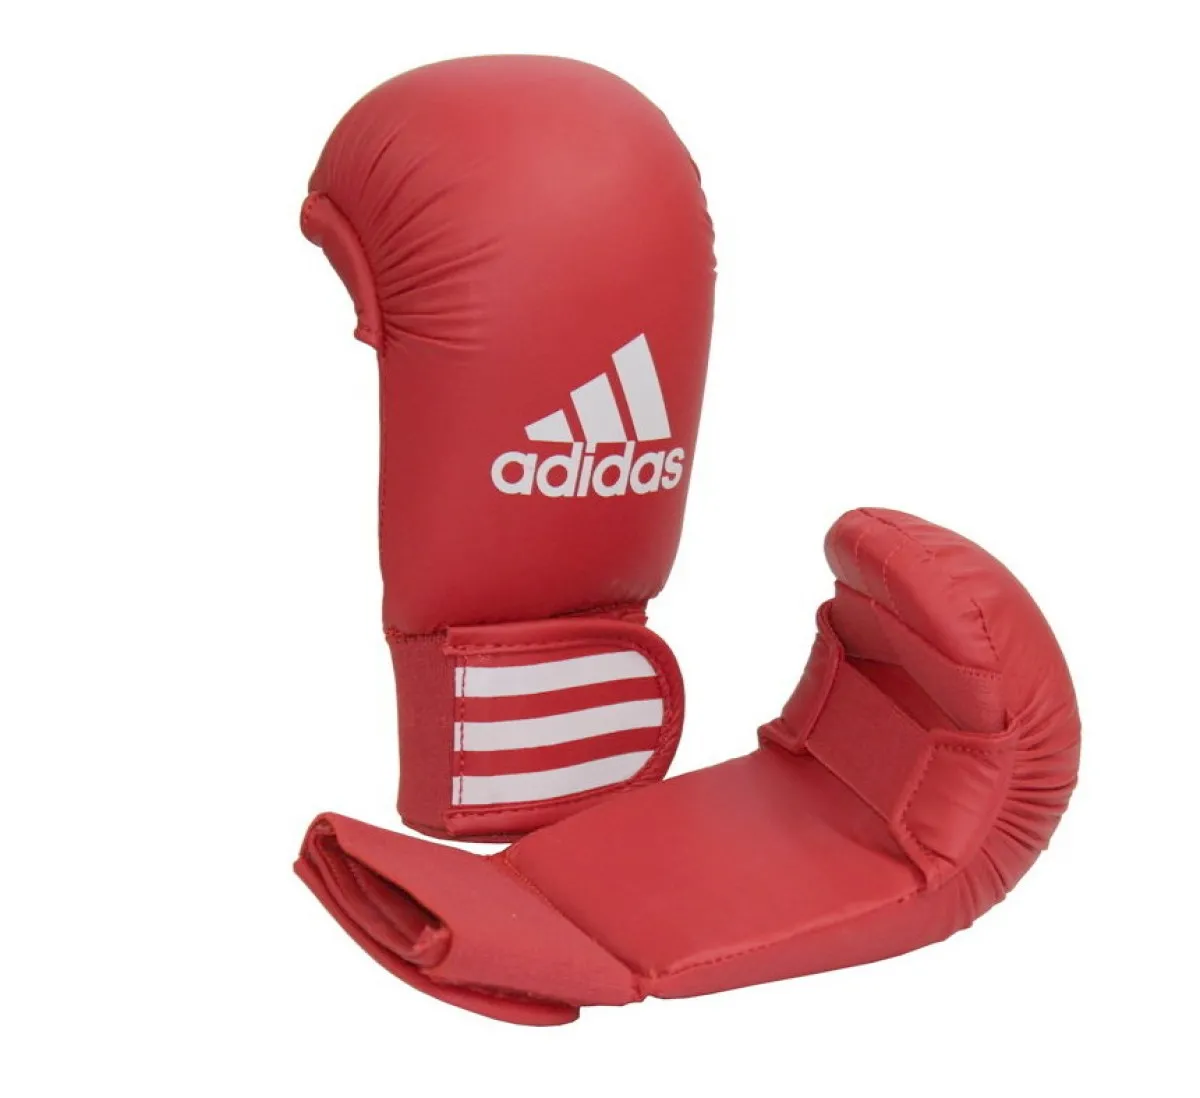 Fist protector adidas Training red